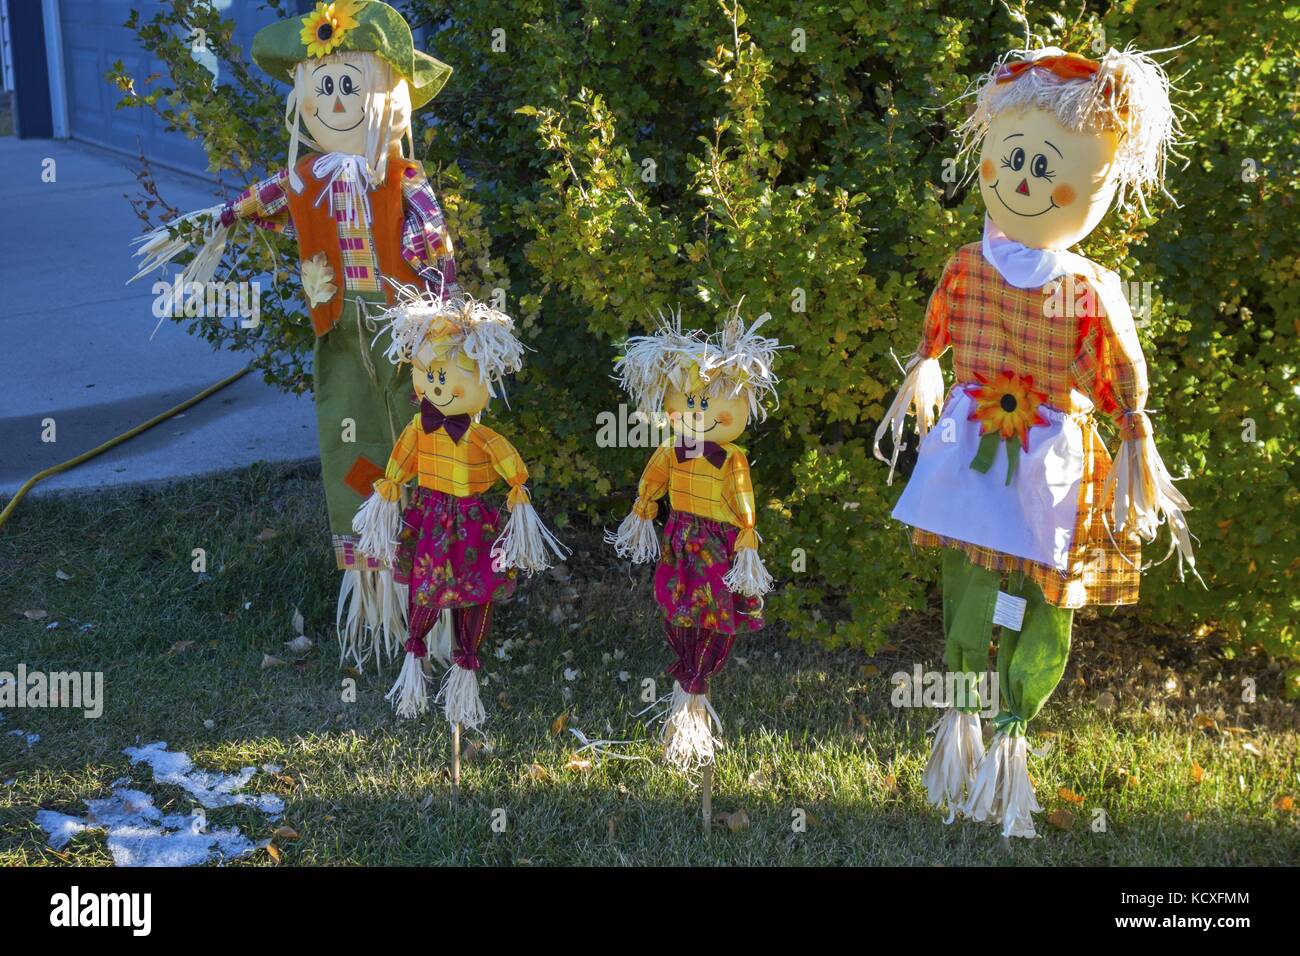 Welcoming Scarecrow Family Stuffed Figures Autumn Decoration on Residential Lawn in Alberta Canada Foothills Stock Photo